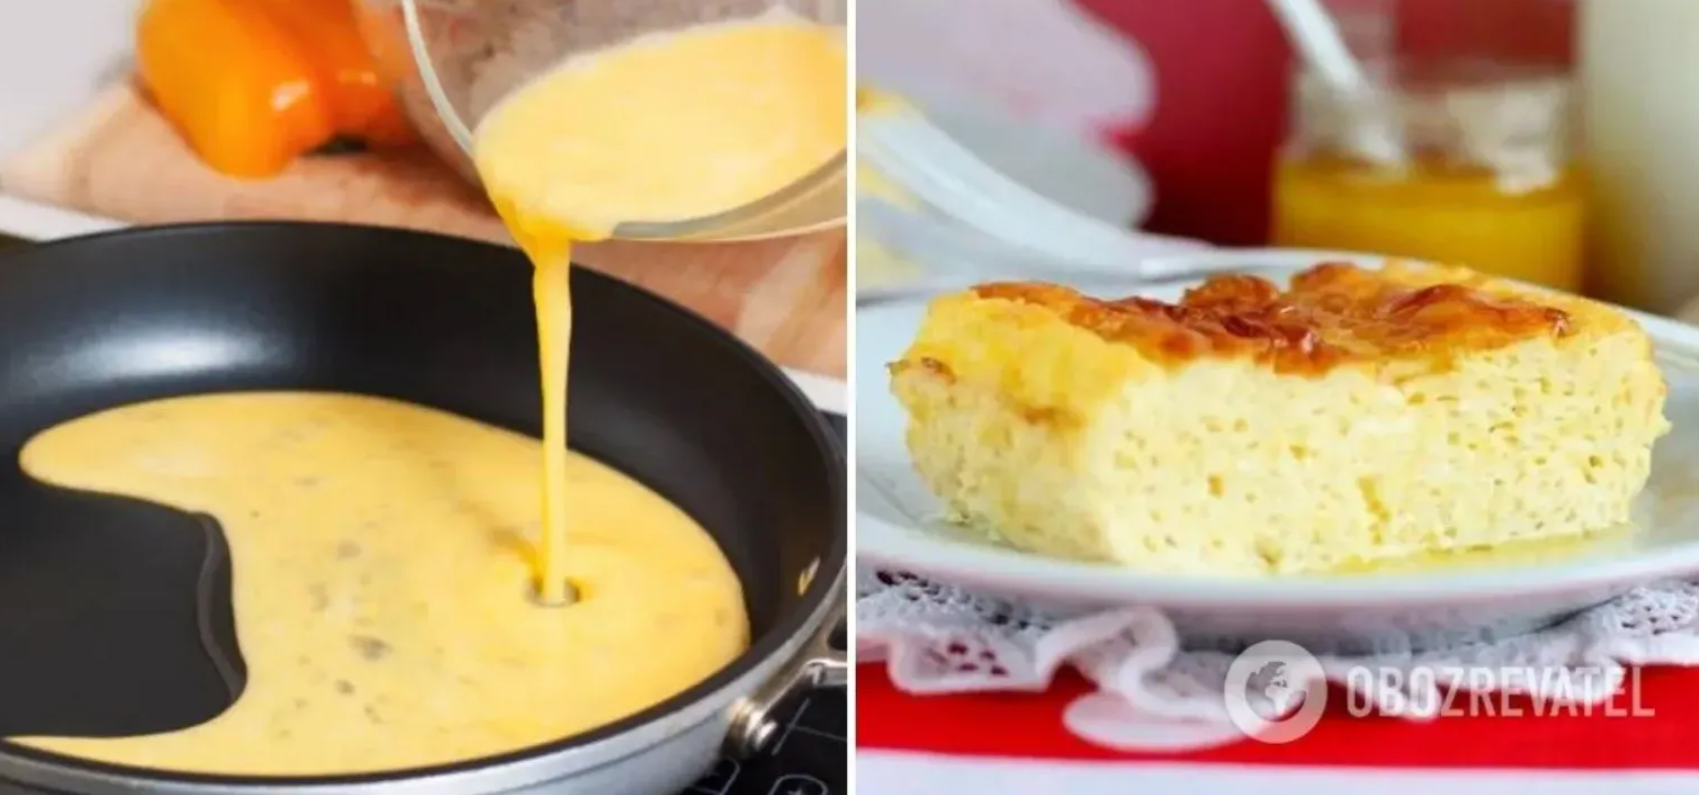 How to make a delicious omelet with cheese